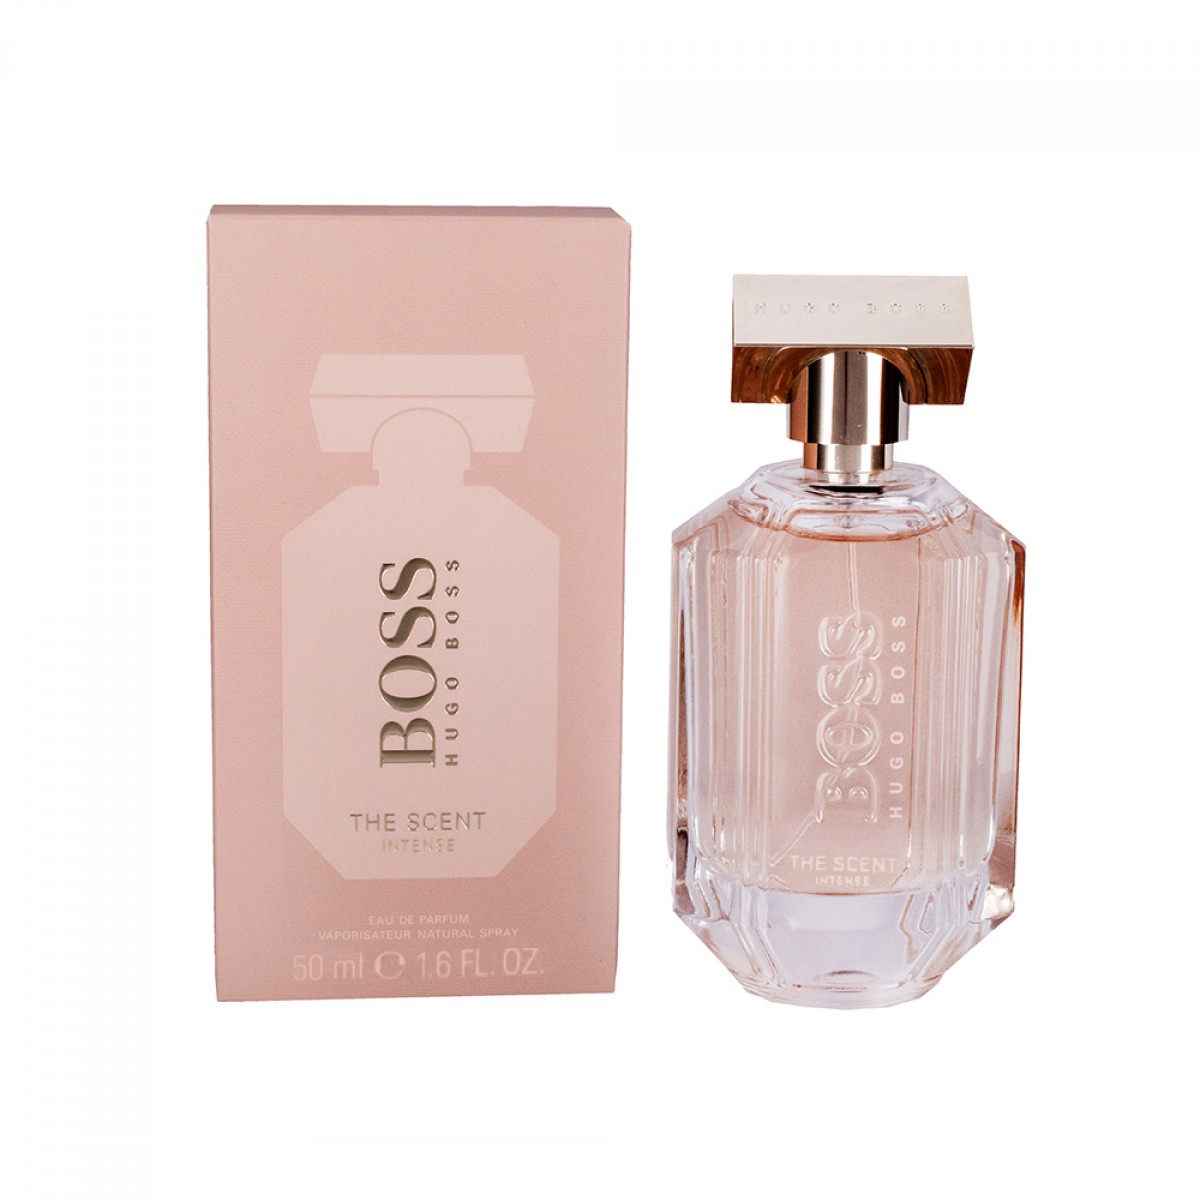 BOSS THE SCENT INTENSE FOR HER EDP 50mL